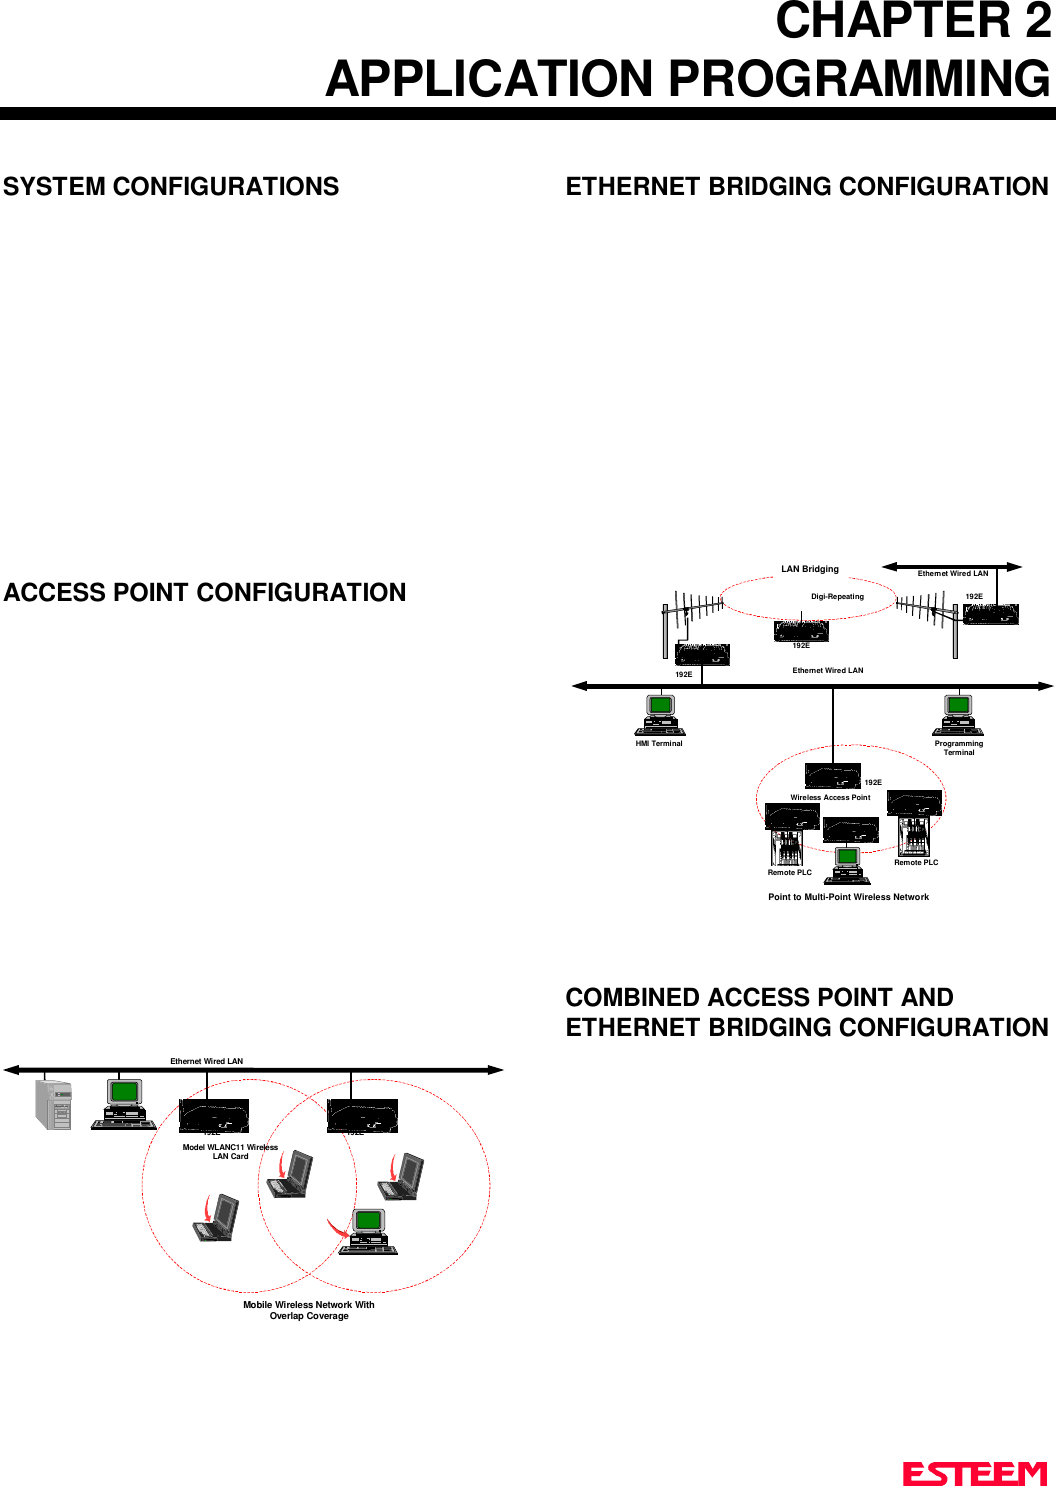 CHAPTER 2APPLICATION PROGRAMMINGSYSTEM CONFIGURATIONSACCESS POINT CONFIGURATIONETHERNET BRIDGING CONFIGURATIONCOMBINED ACCESS POINT ANDETHERNET BRIDGING CONFIGURATIONEthernet Wired LANMobile Wireless Network WithOverlap Coverage192EModel WLANC11 WirelessLAN Card192EPoint to Multi-Point Wireless Network192EEthernet Wired LANWireless Access PointProgrammingTerminalHMI TerminalRemote PLCRemote PLC192E192EEthernet Wired LANLAN BridgingDigi-Repeating192E